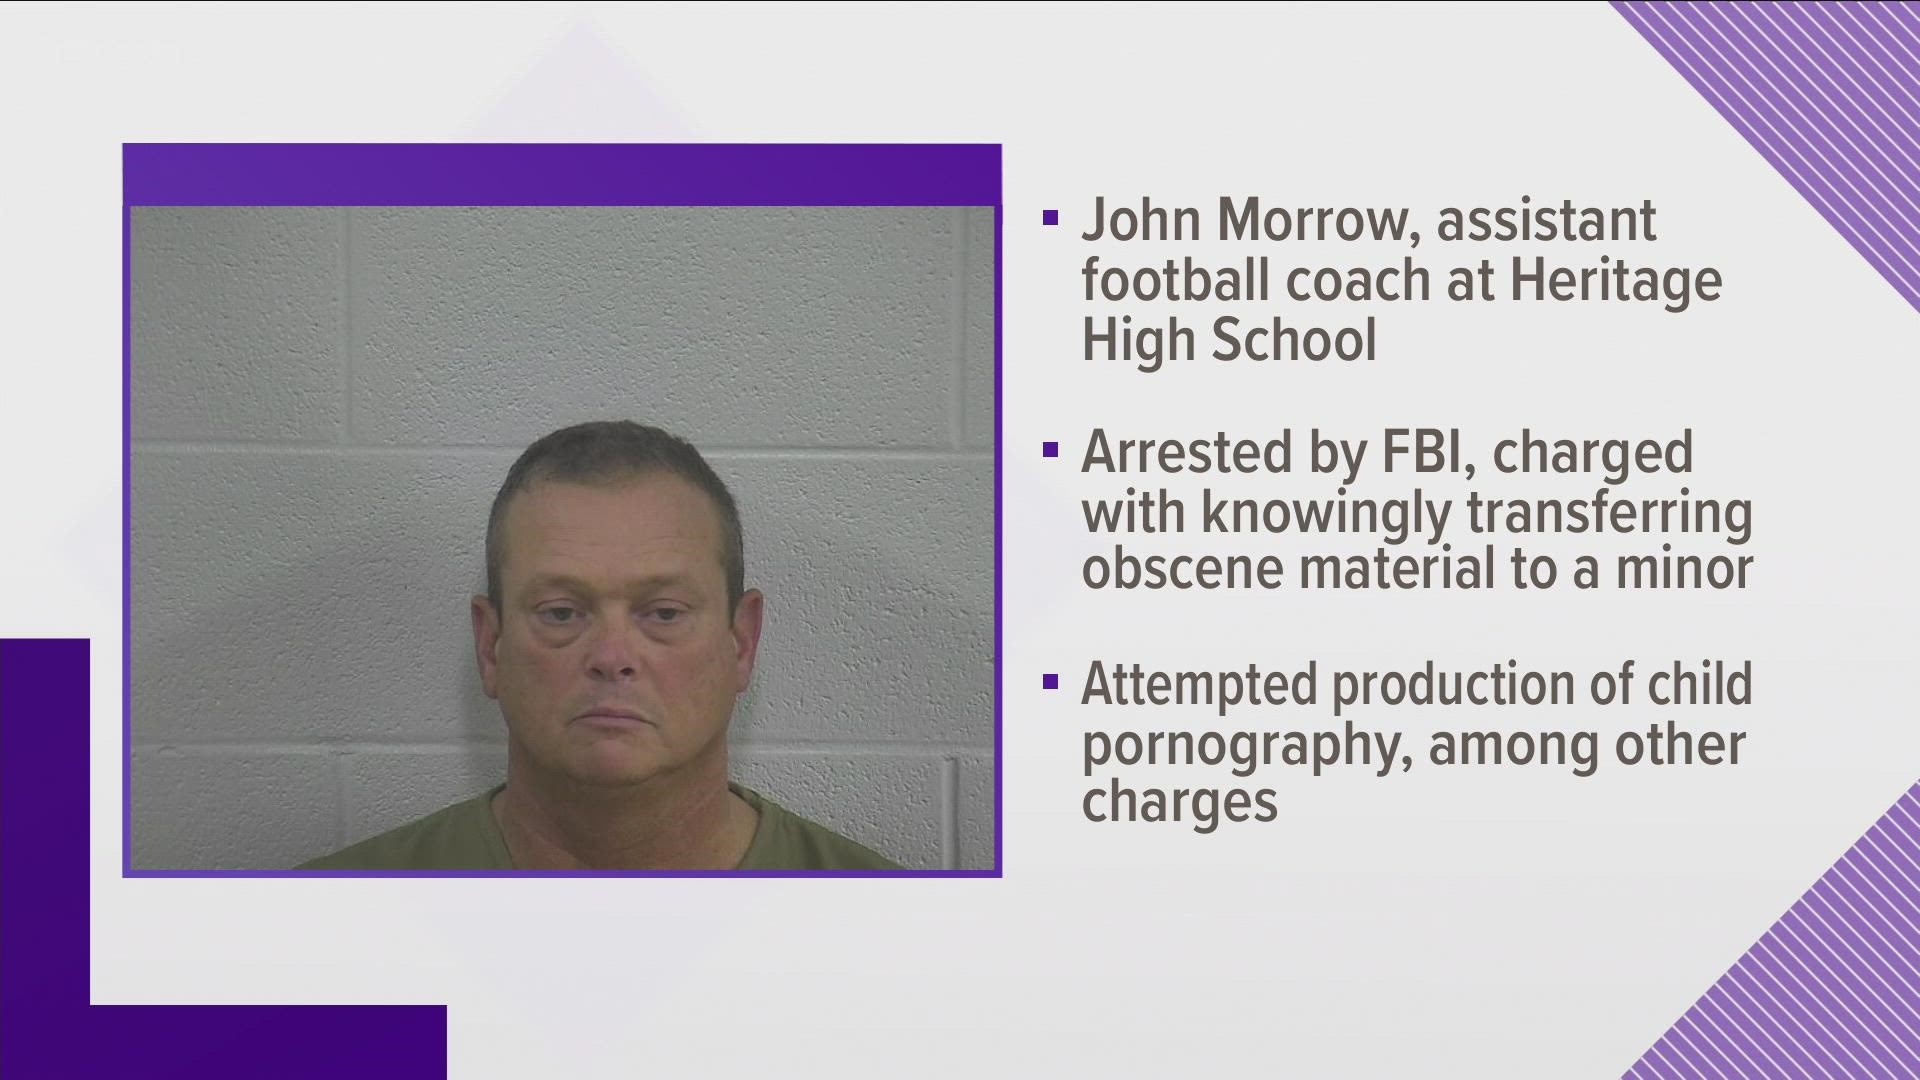 John Morrow, who worked at Heritage High School in Blount County, faces child sex charges after an FBI sting focused on finding offenders on social media.